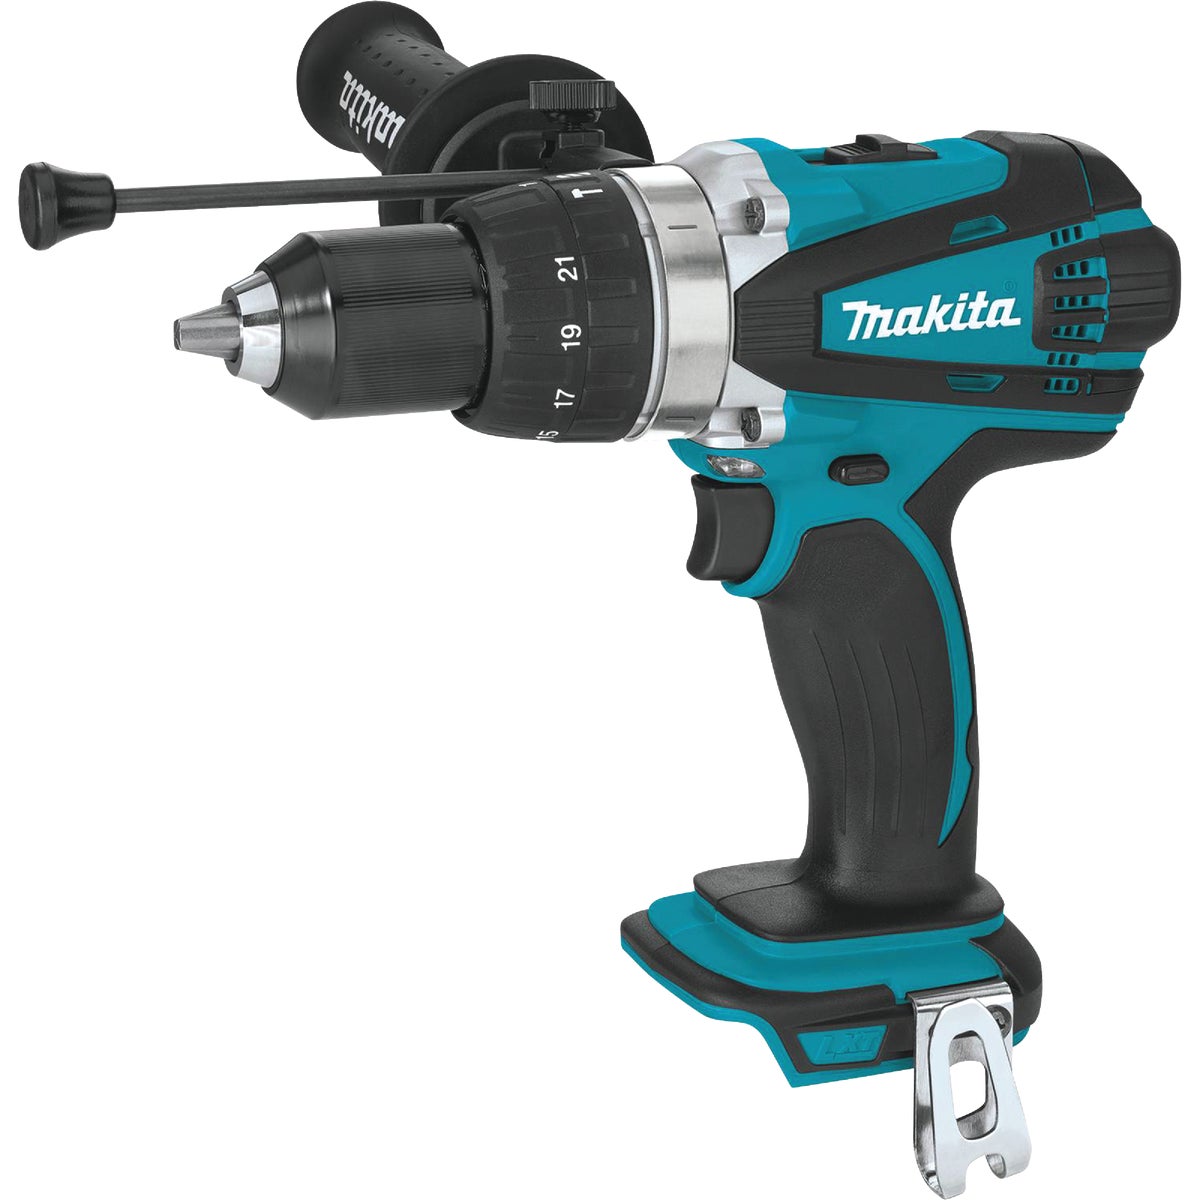 Makita 18-Volt LXT Lithium-Ion 1/2 In. Cordless Hammer Drill (Tool Only)